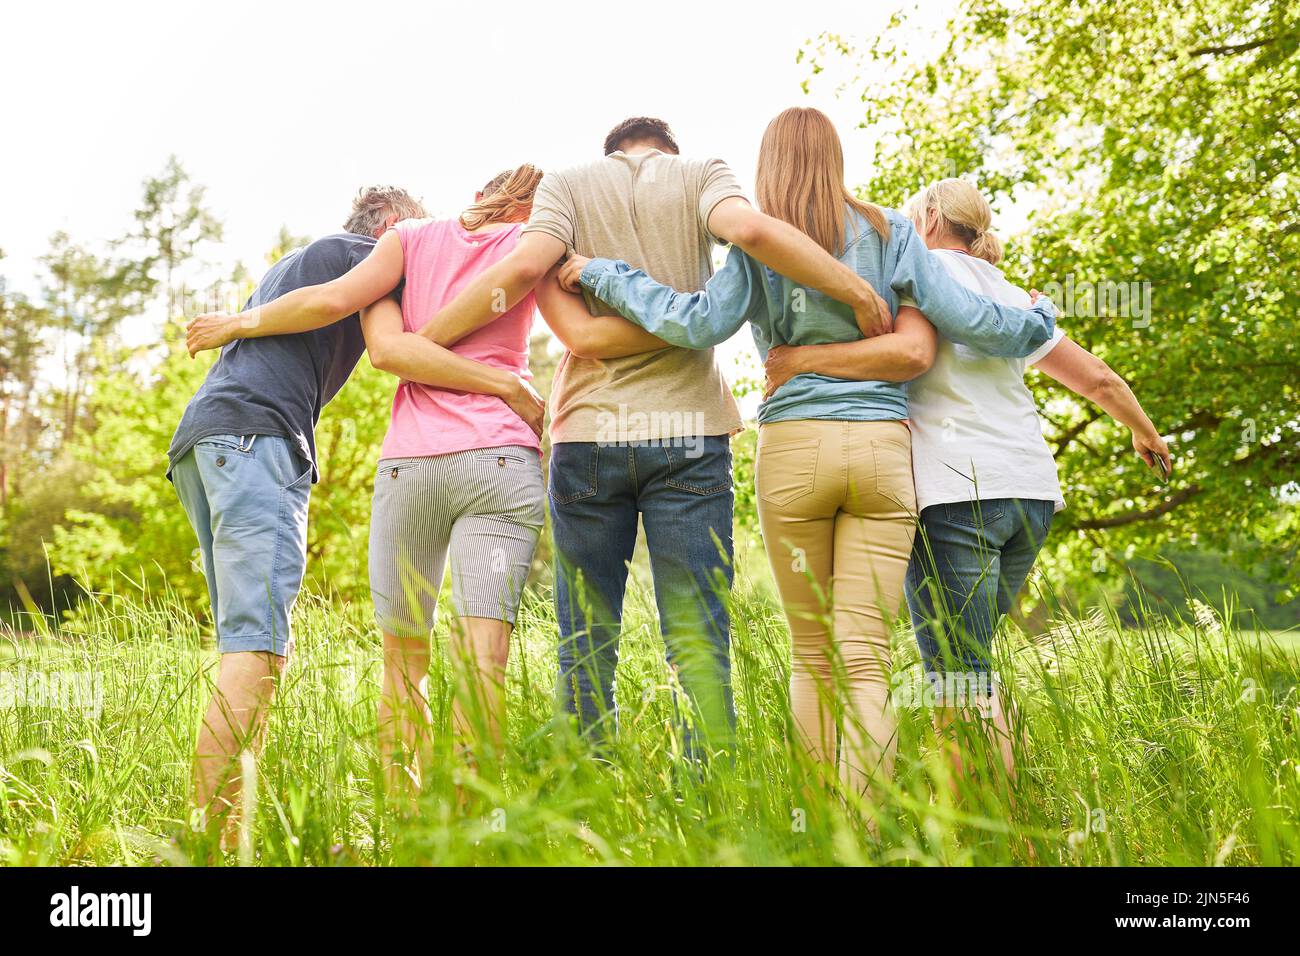 Family or group of friends arm in arm on a summer nature outing Stock Photo